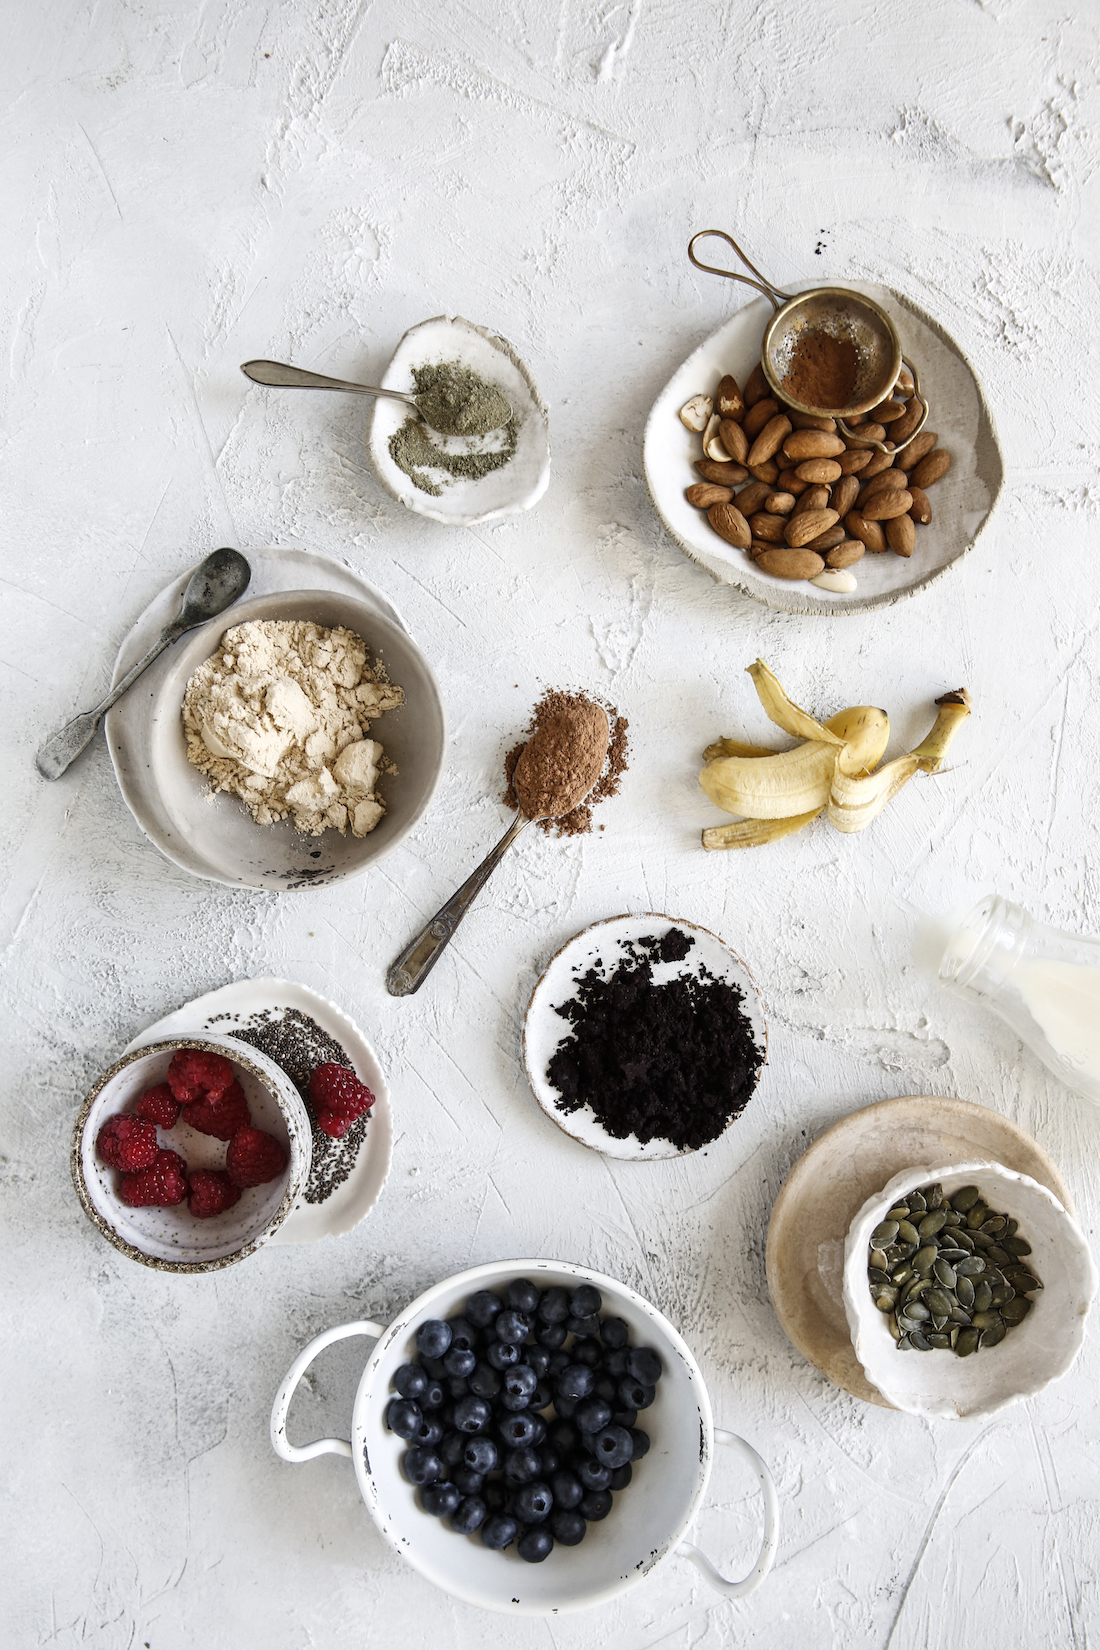 Berries, chia, nuts, Vital greens, protein powder, bananas, cacao &amp; seeds. All amazing things to keep in the pantry for smoothies, breakfast bowls &amp; snacks during the day. 